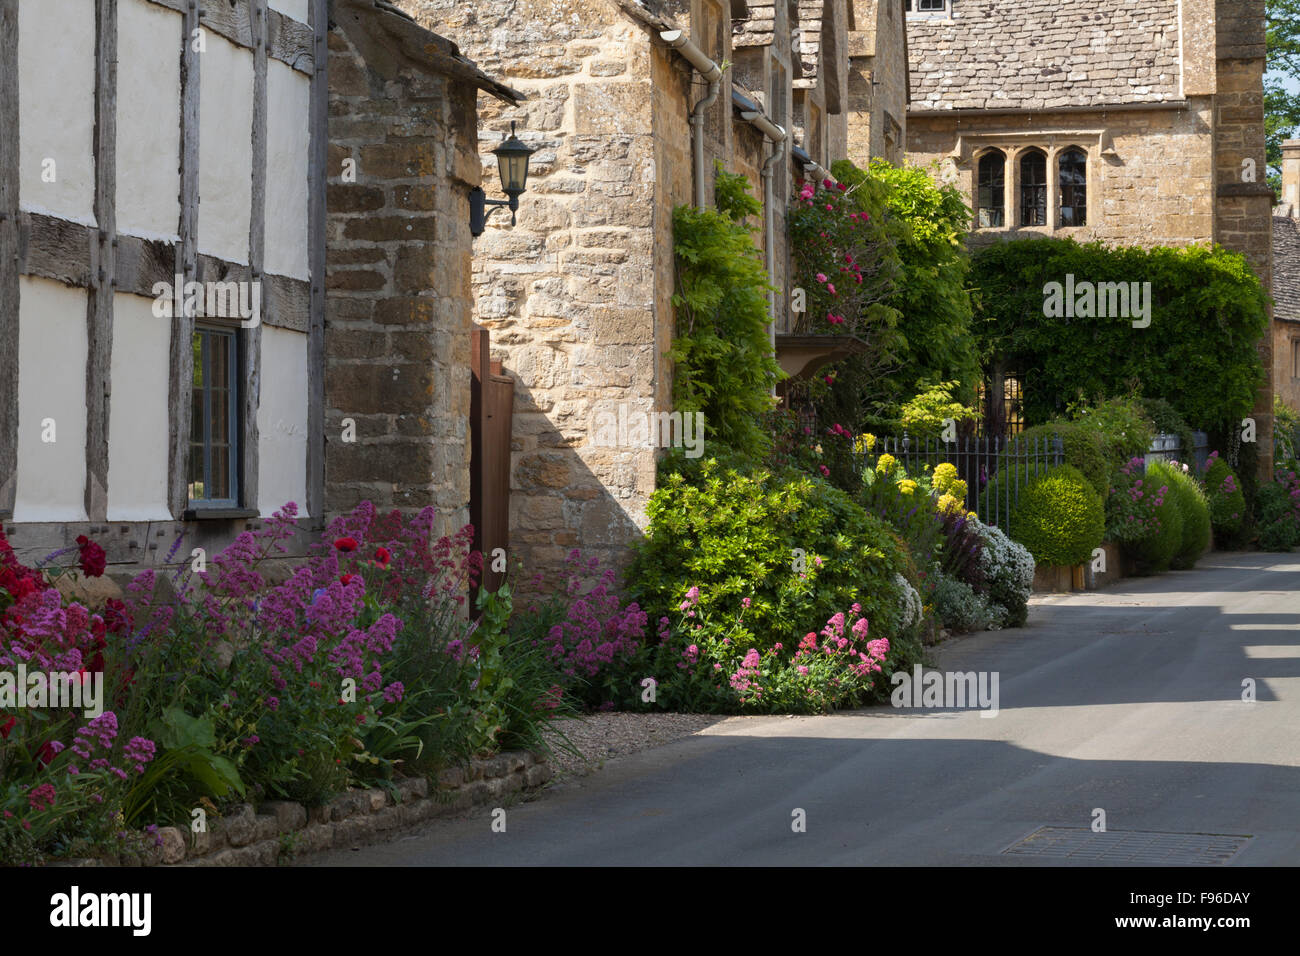 Colourful summer flowers and fine stone houses line a quiet street in the Cotswolds village of Stanton, Gloucestershire, England Stock Photo